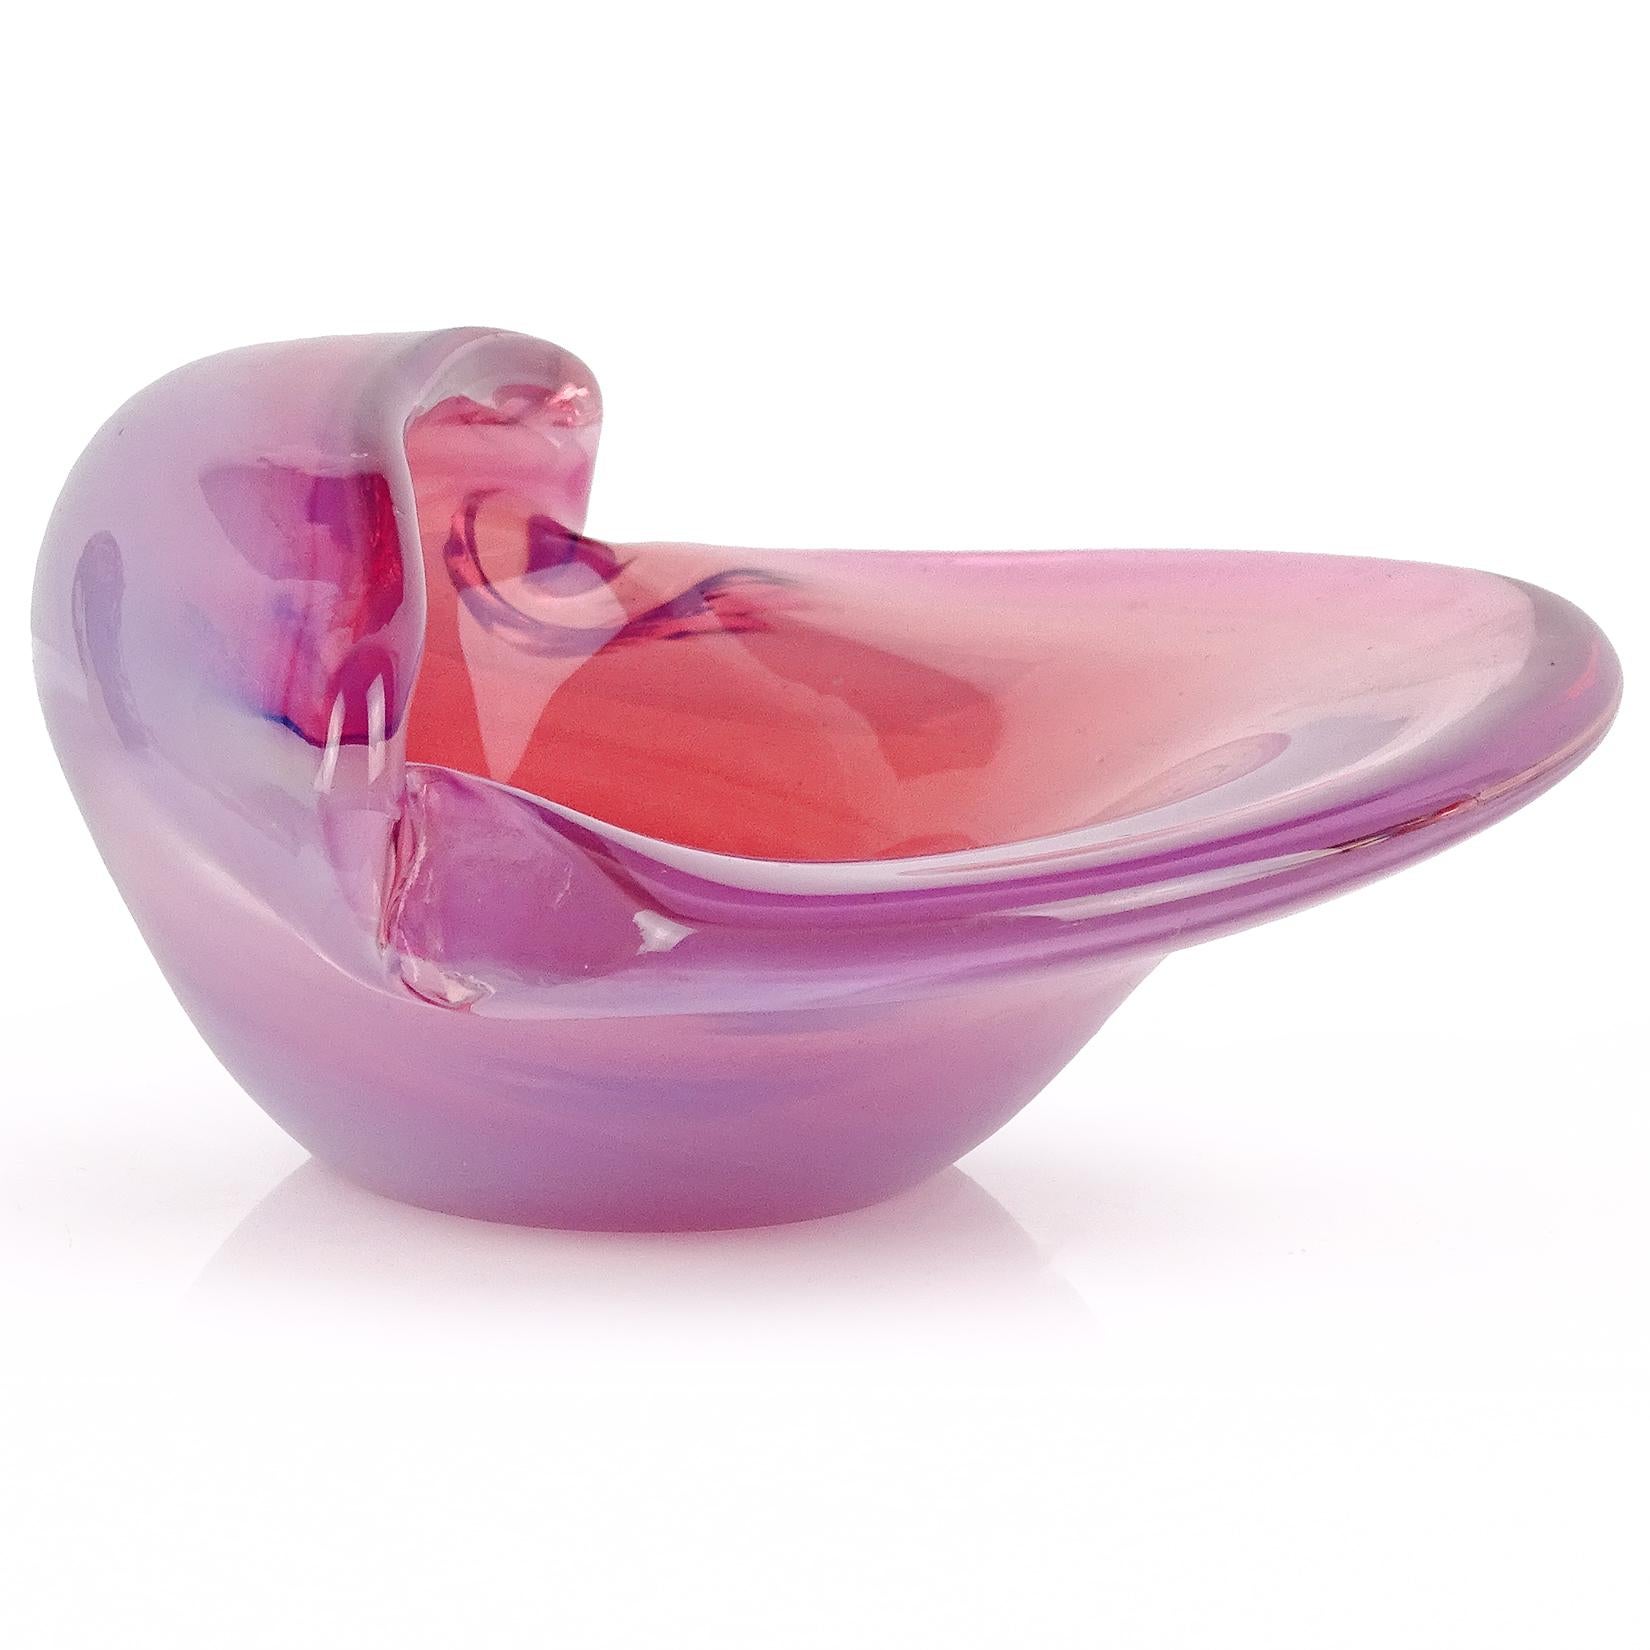 Beautiful Murano hand blown opalescent white and pink Italian art glass clam shell decorative bowl. Documented to the Cenedese Company. Would make a great jewelry, trinket or business card holder. Measures: 7 1/4